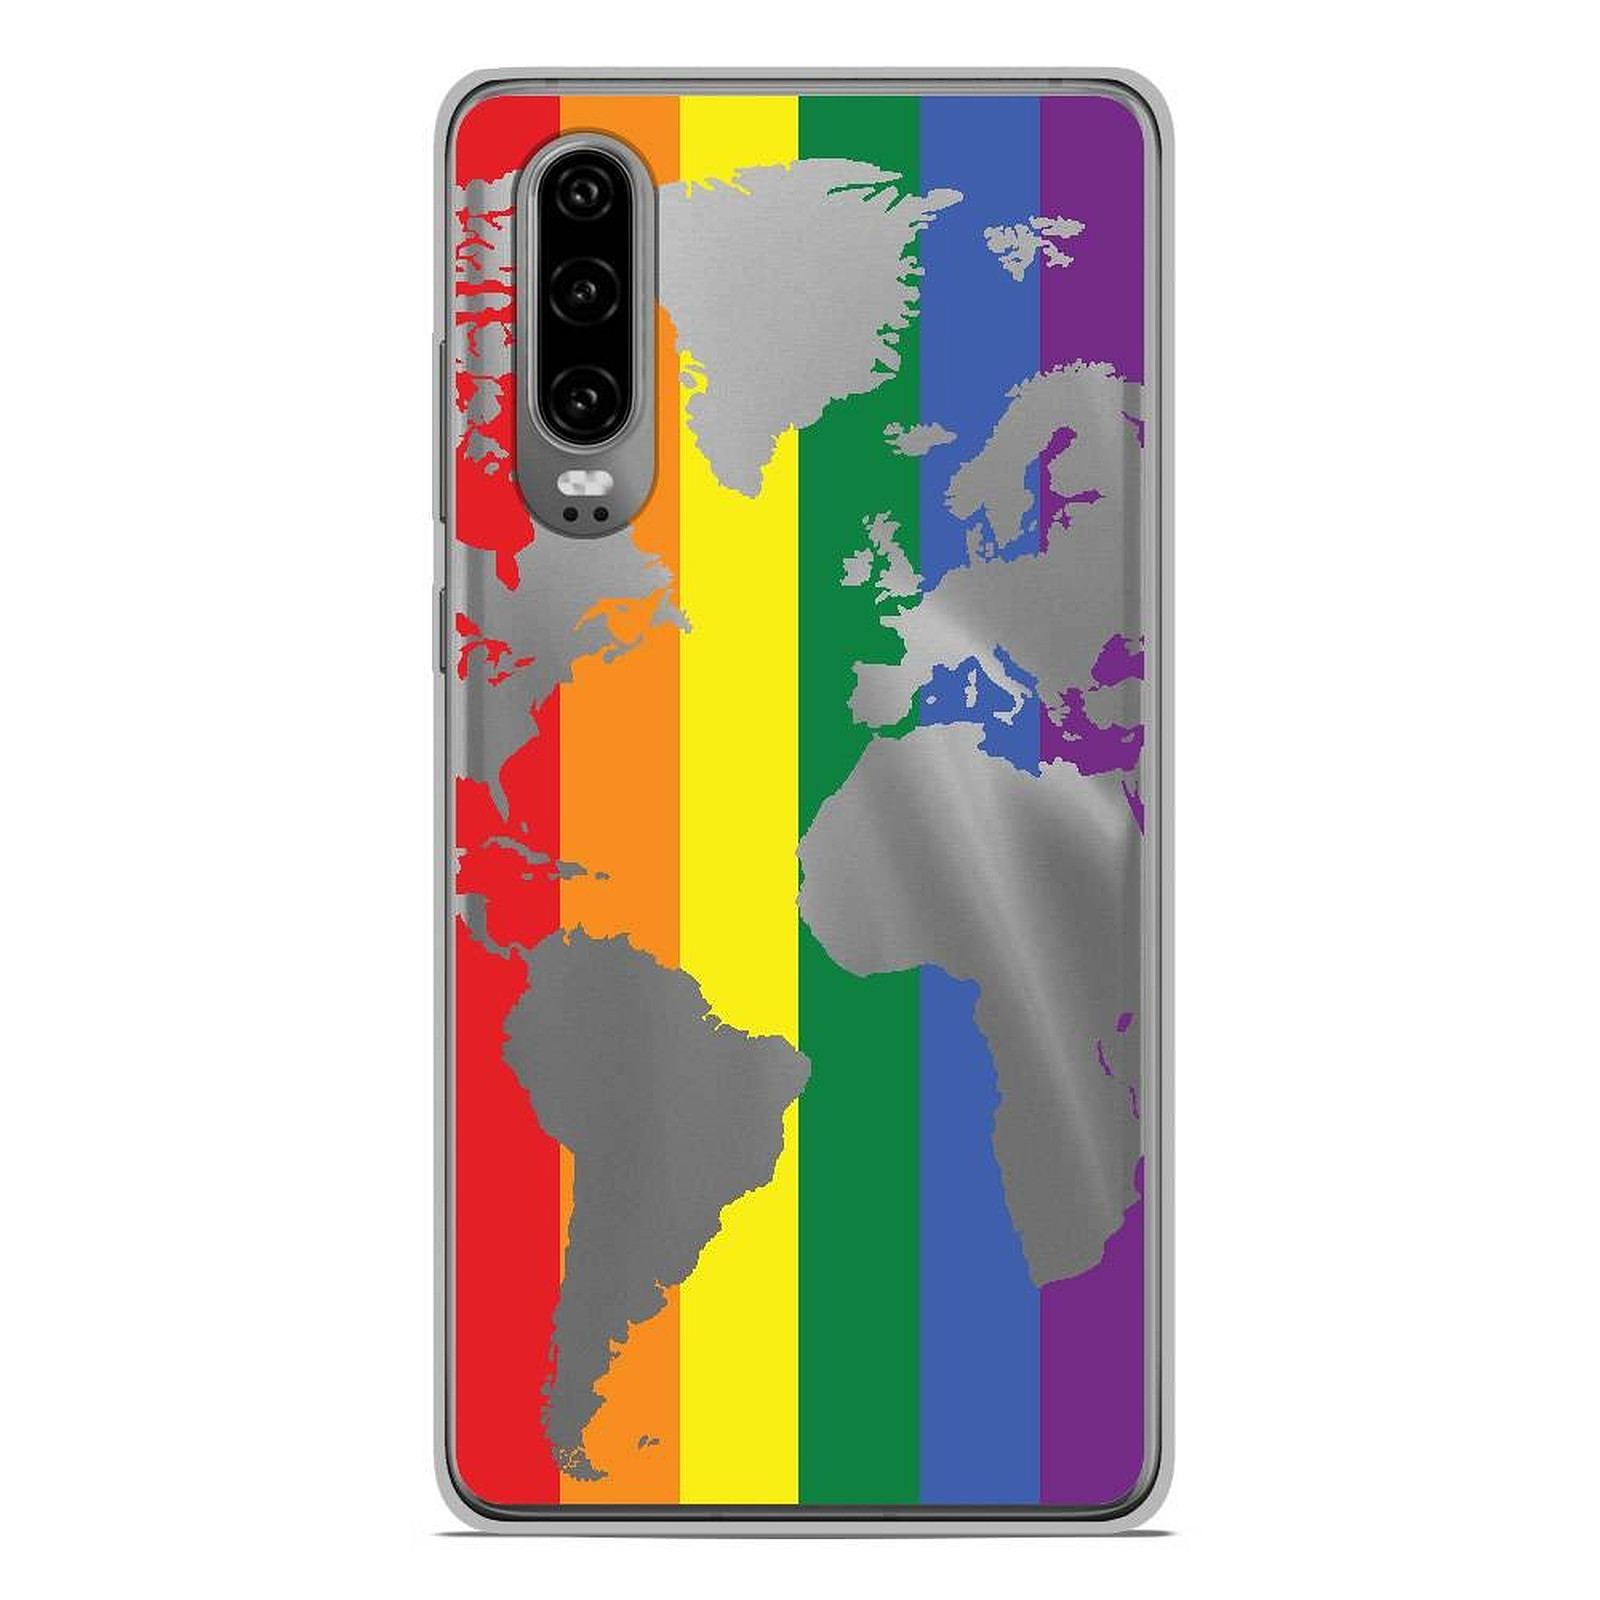 1001 Coques Coque silicone gel Huawei P30 motif Map LGBT - Coque telephone 1001Coques